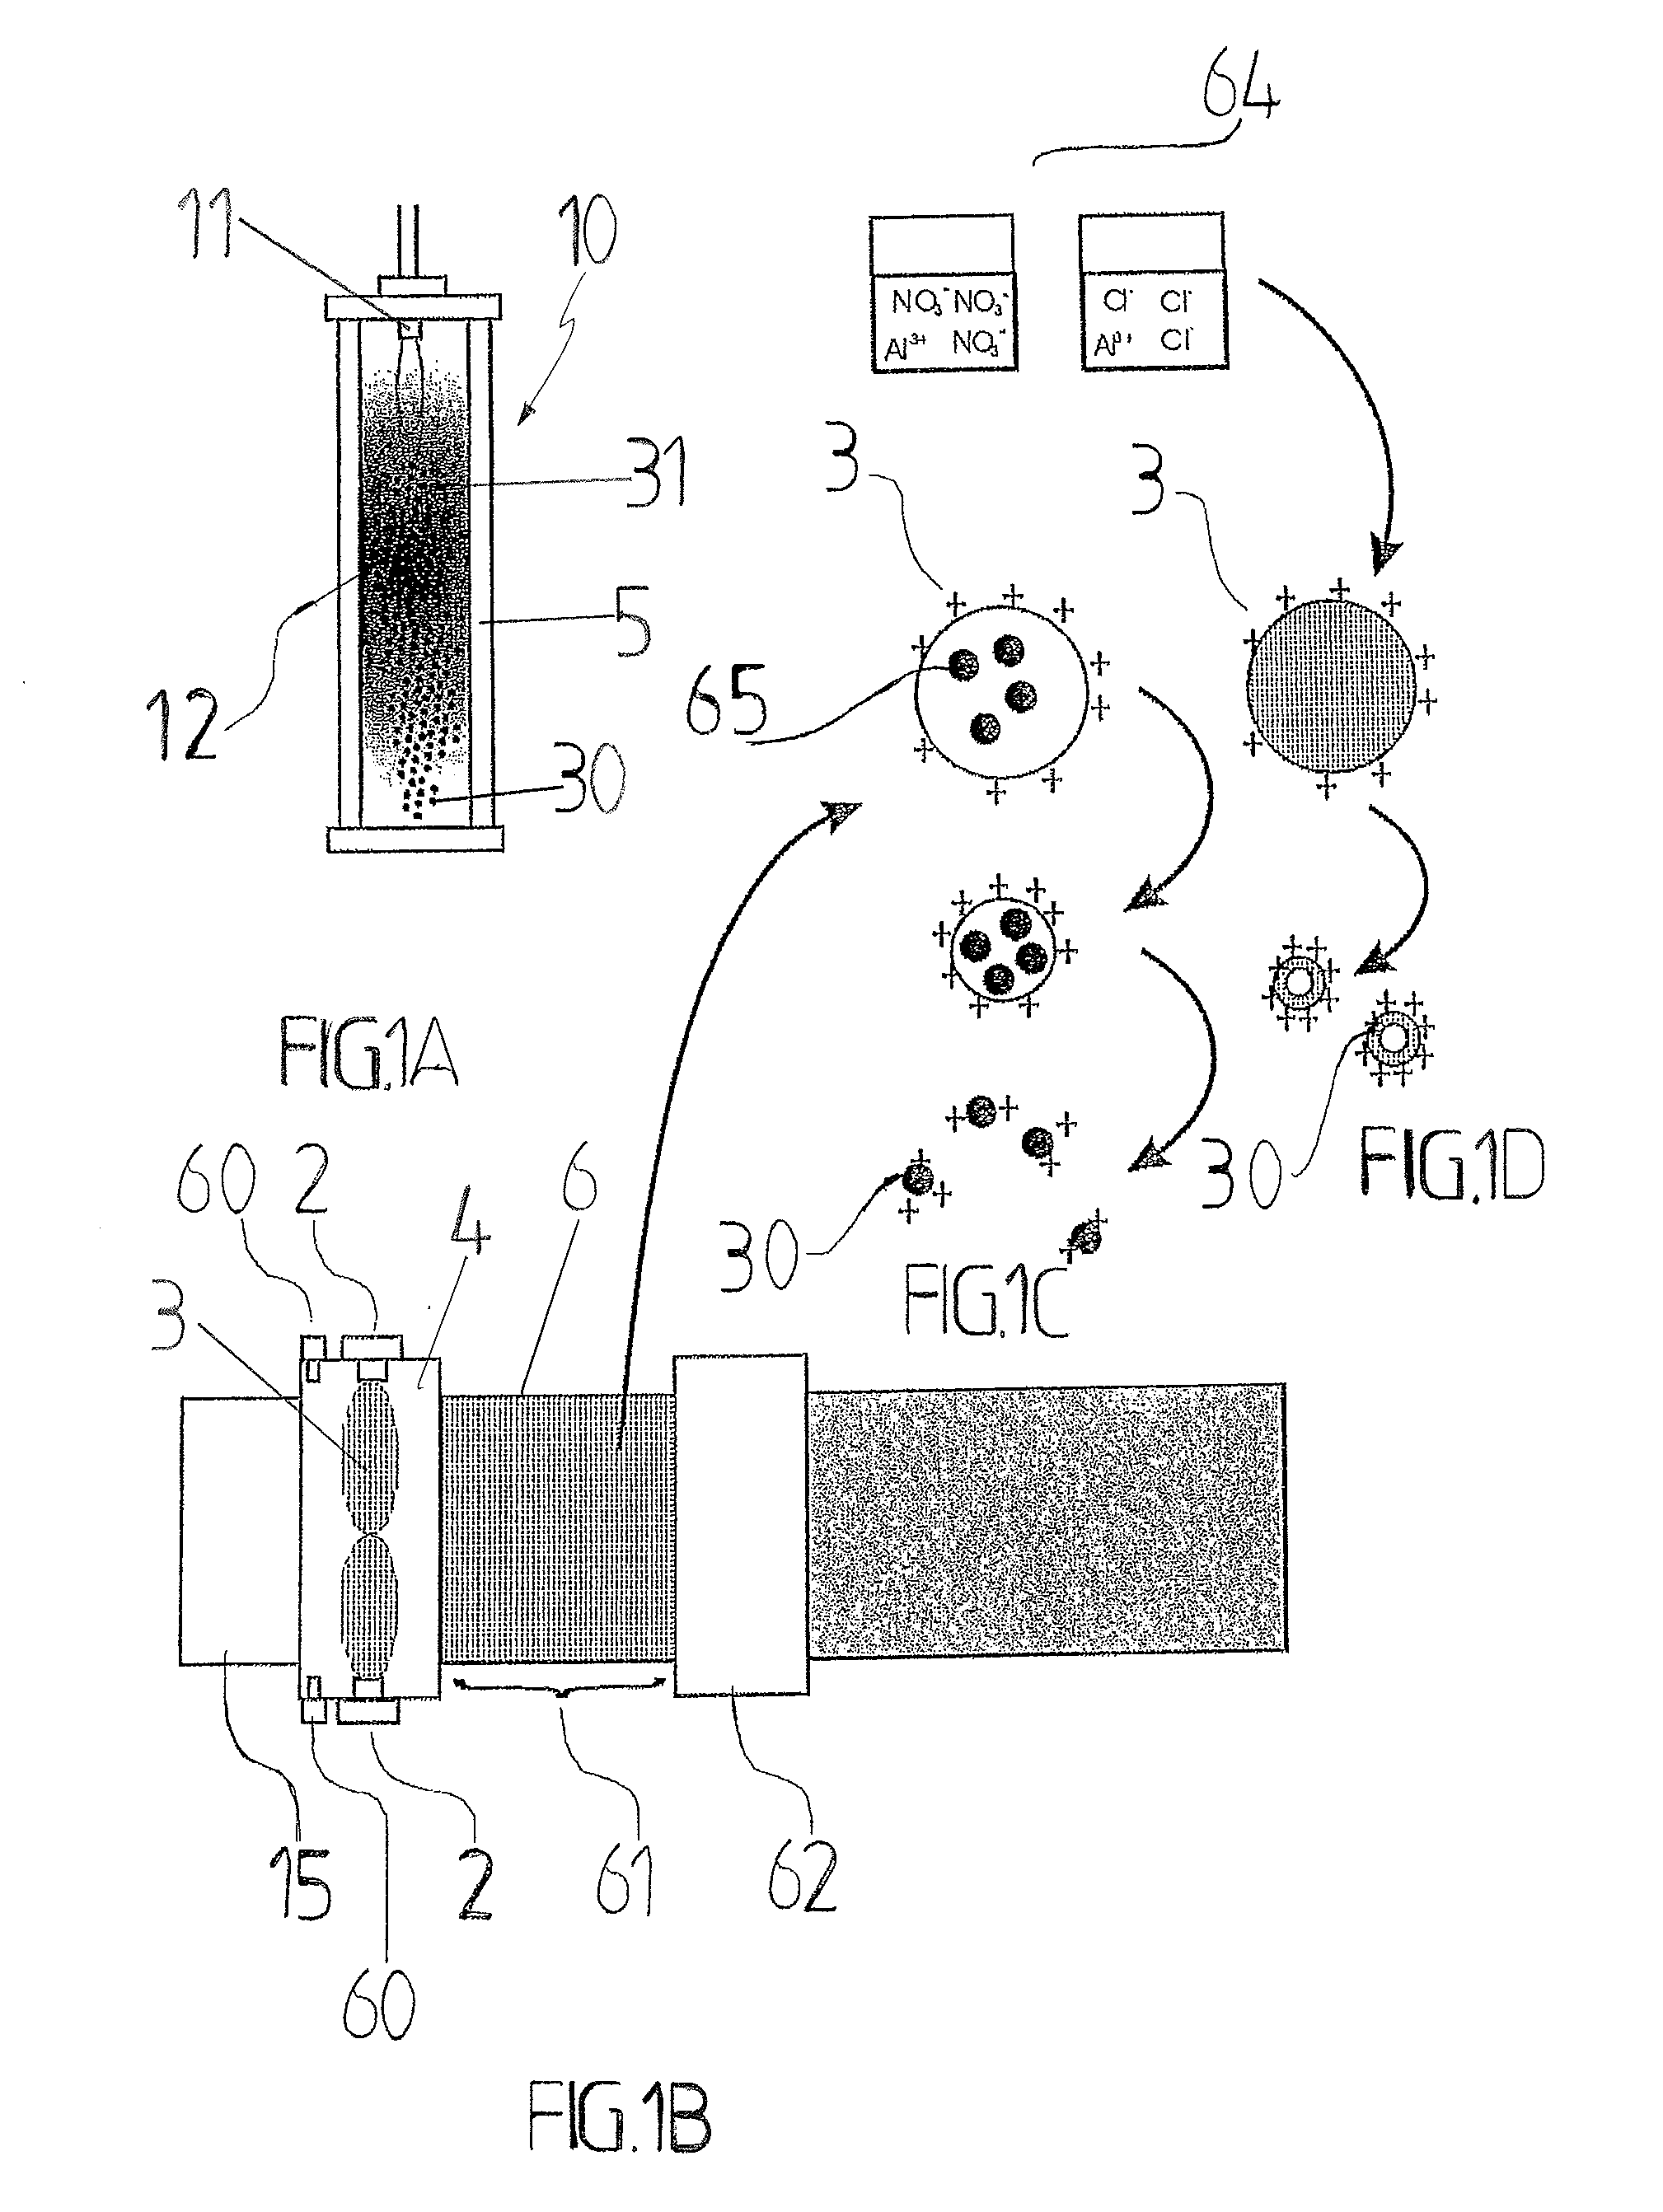 Apparatus and method for charging nanoparticles